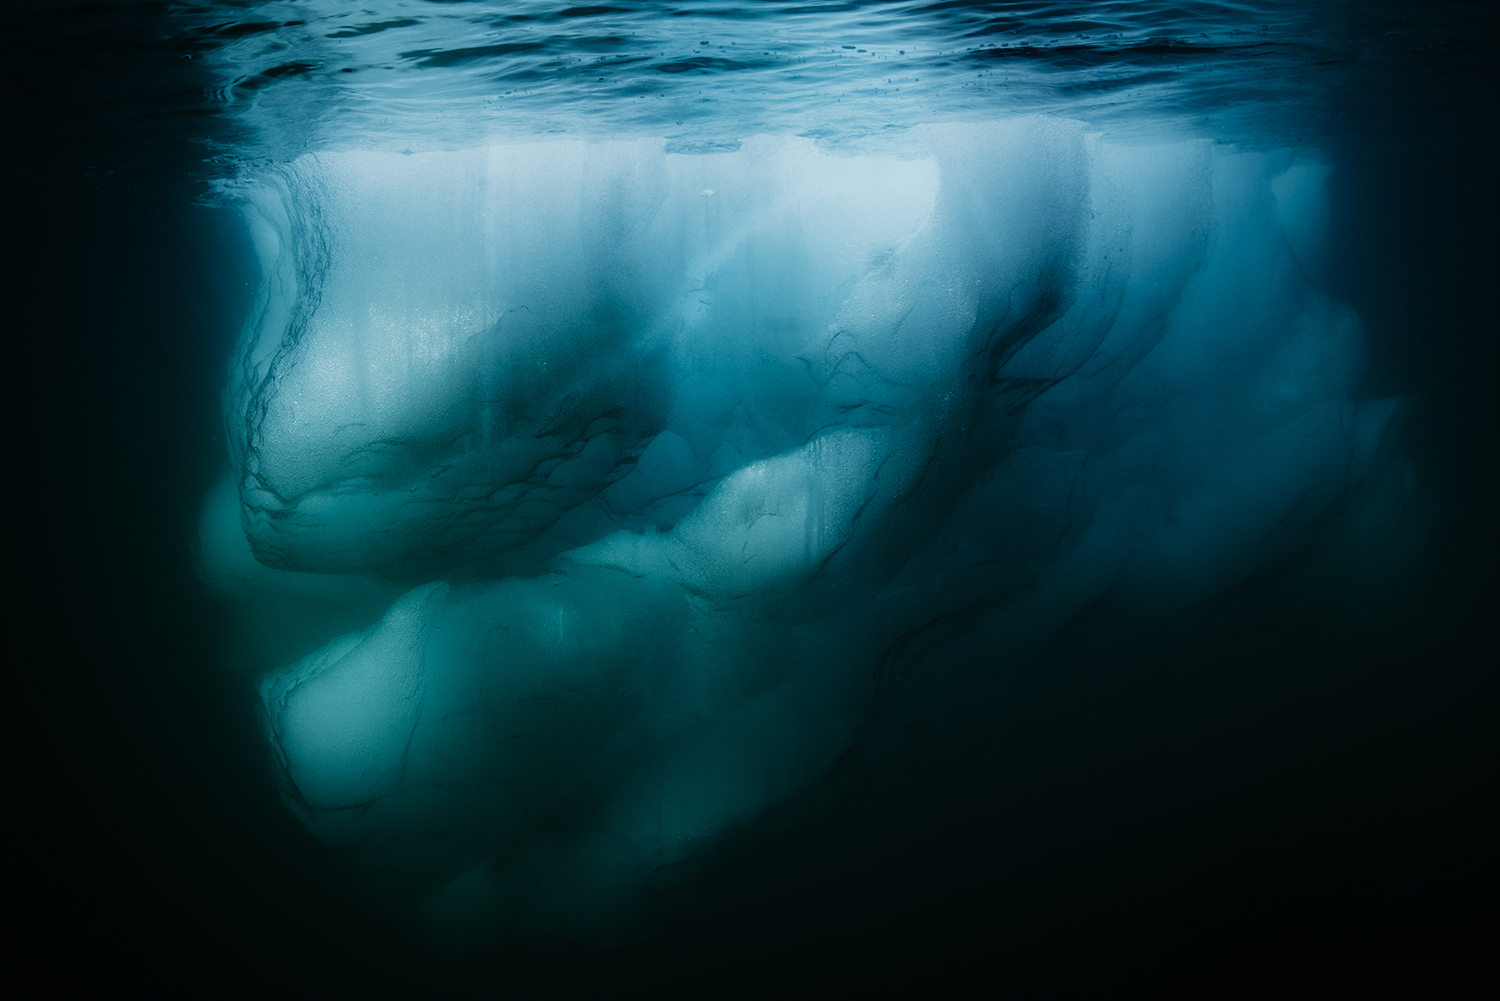 Underwater image of a iceberg Iceberg in Greenland. Positioned in the Arctic, Greenland is especially vulnerable to climate change and has experienced record melting in recent years and is likely to contribute substantially to sea level rise as well as to possible changes in ocean circulation in the future. Glaciers worldwide store about 75 percent of the worldâs fresh water and if all land ice melted, sea level would rise approximately 70 meters worldwide.